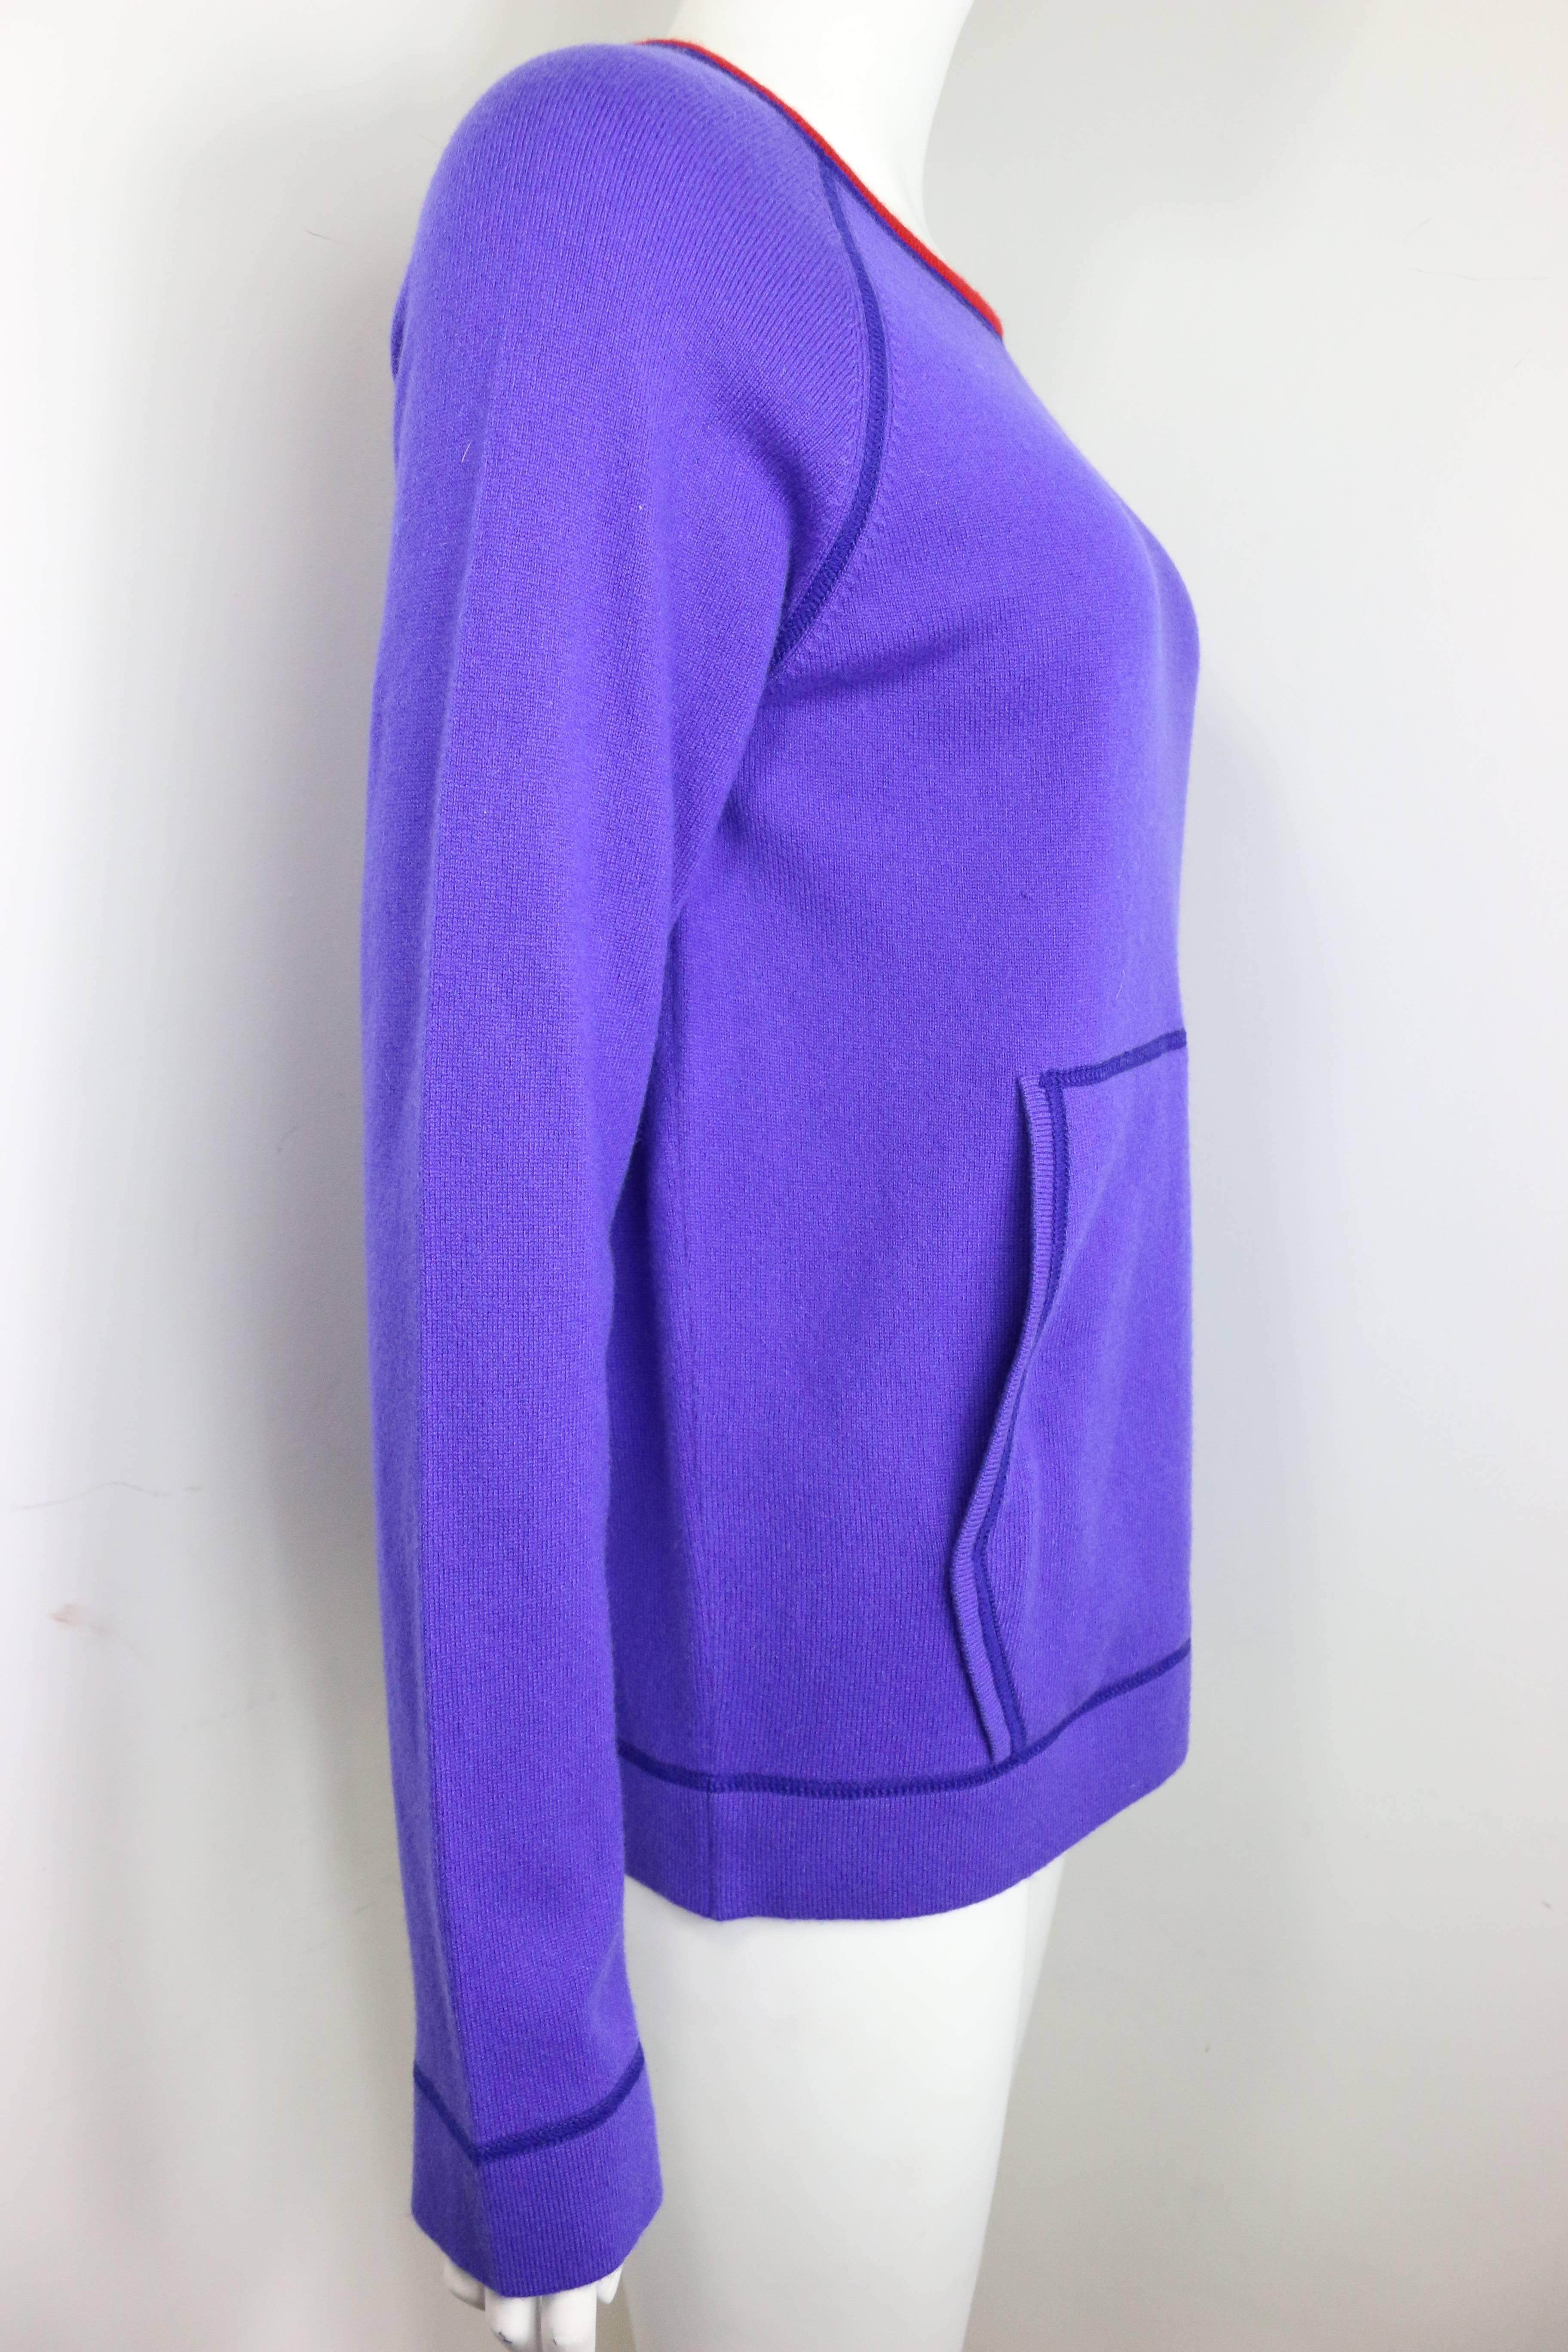 Chanel Purple with Red Trim Collar Pullover Cashmere Sweater  In Excellent Condition For Sale In Sheung Wan, HK